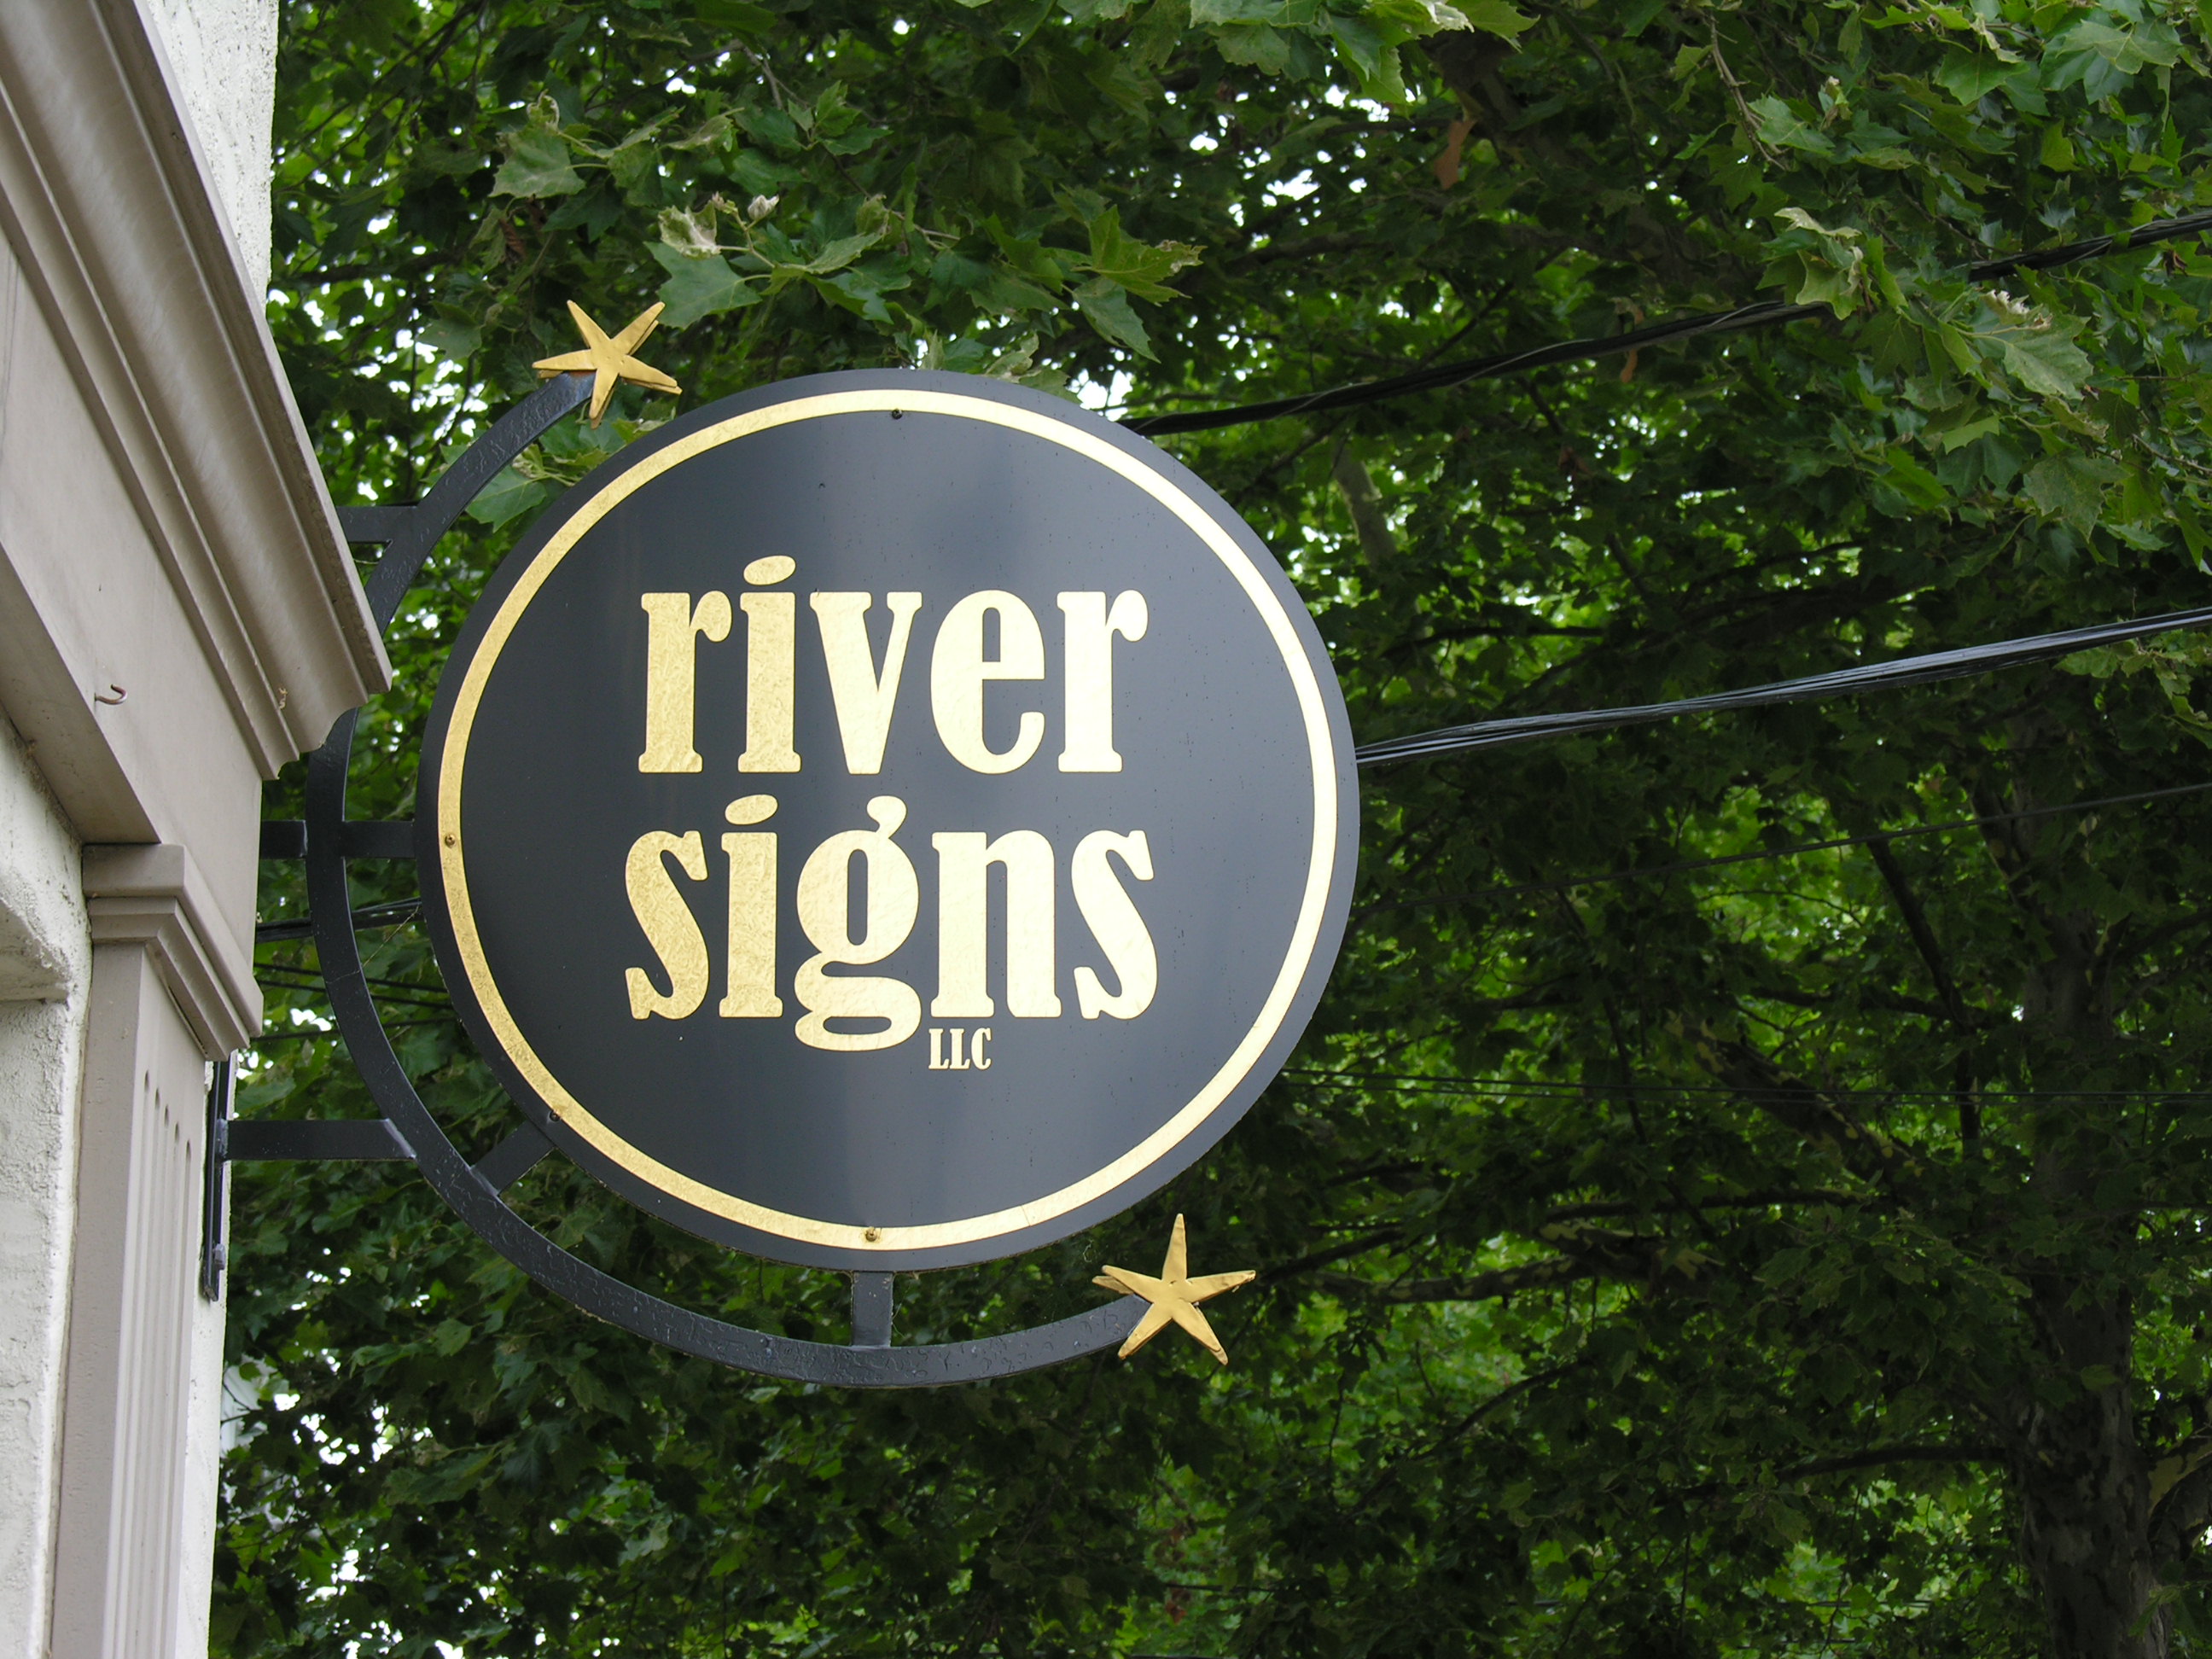 Polymetal Signs - River Signs